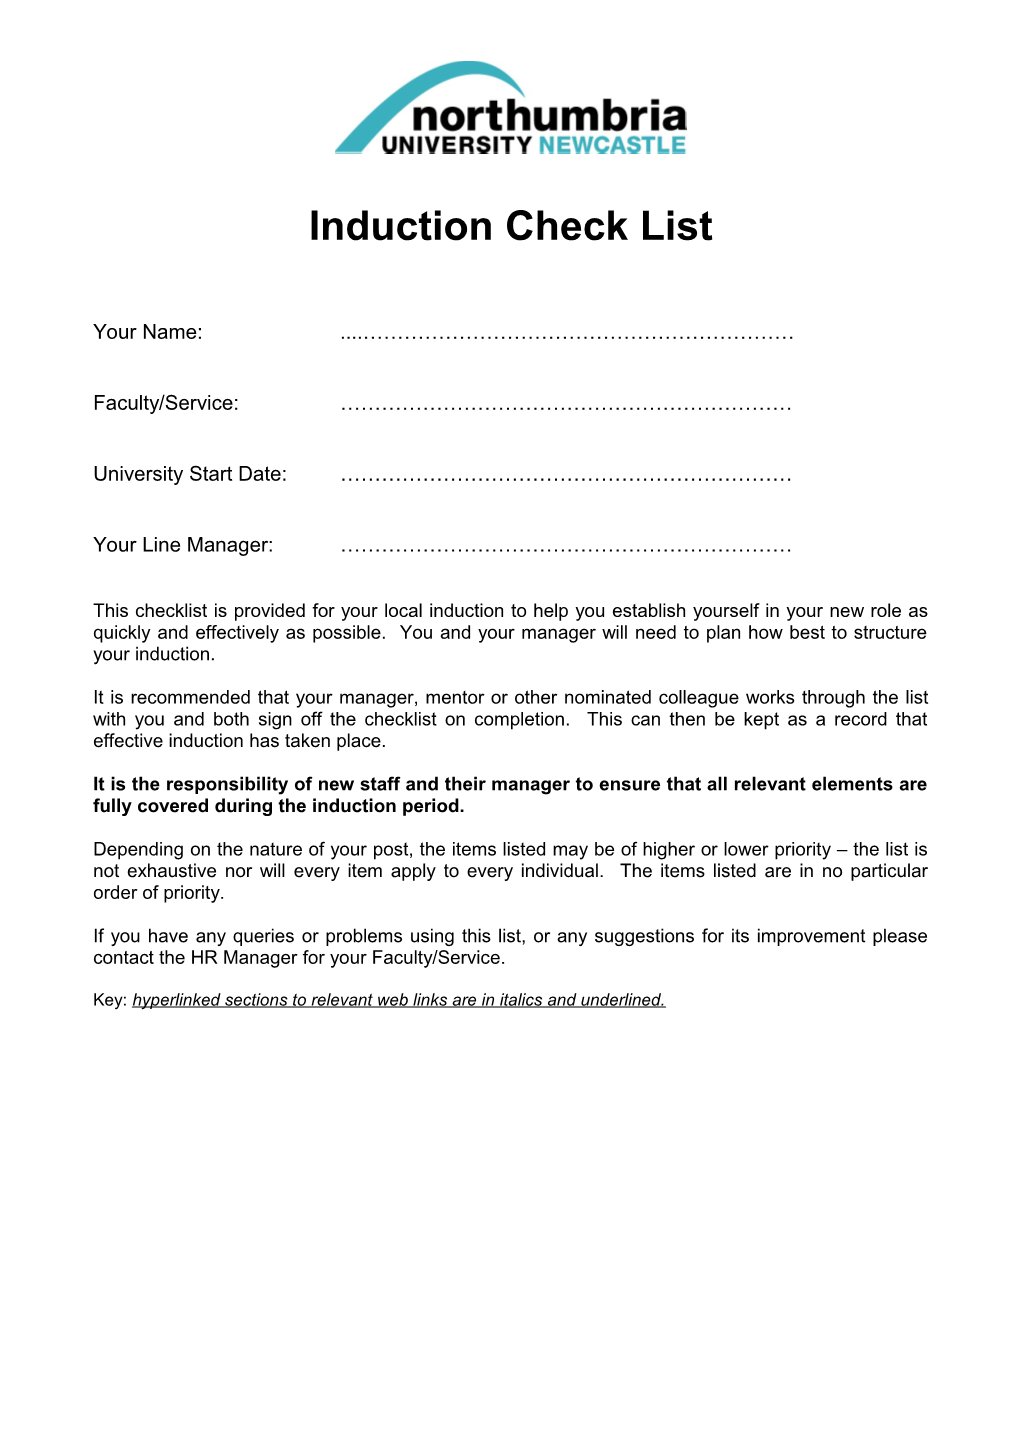 Induction Check List